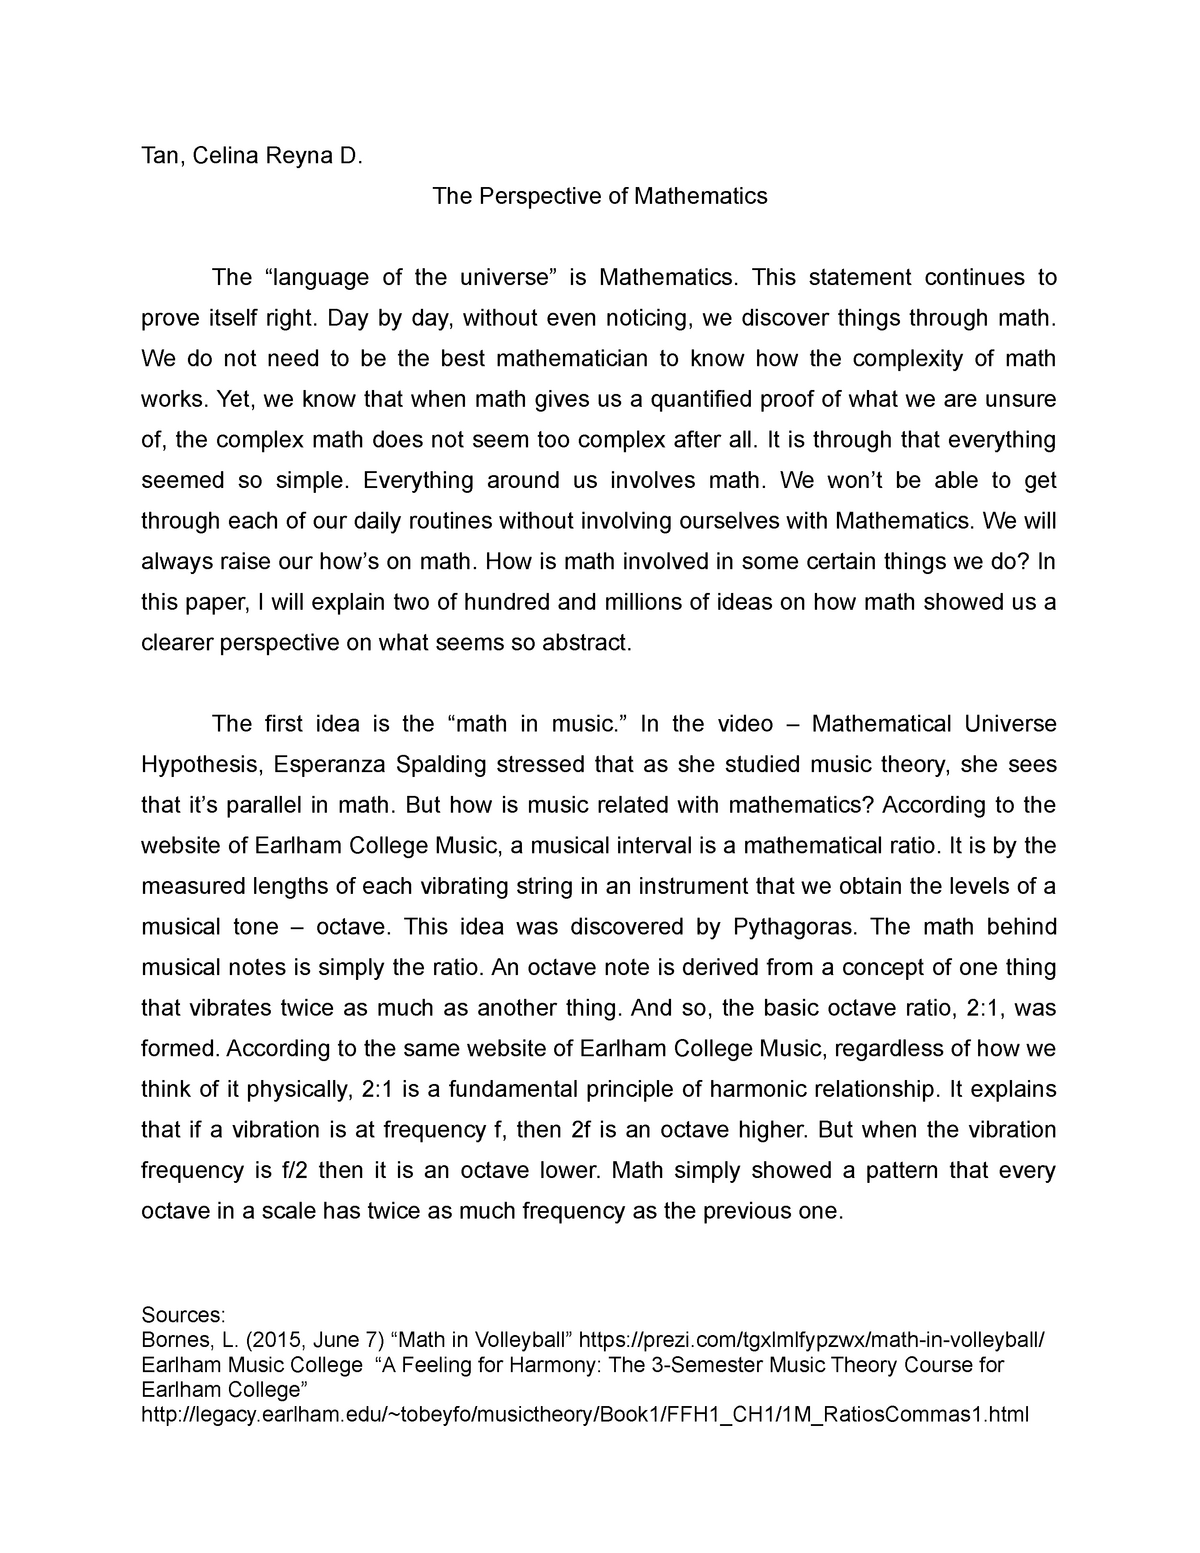 example of synthesis paper about mathematics